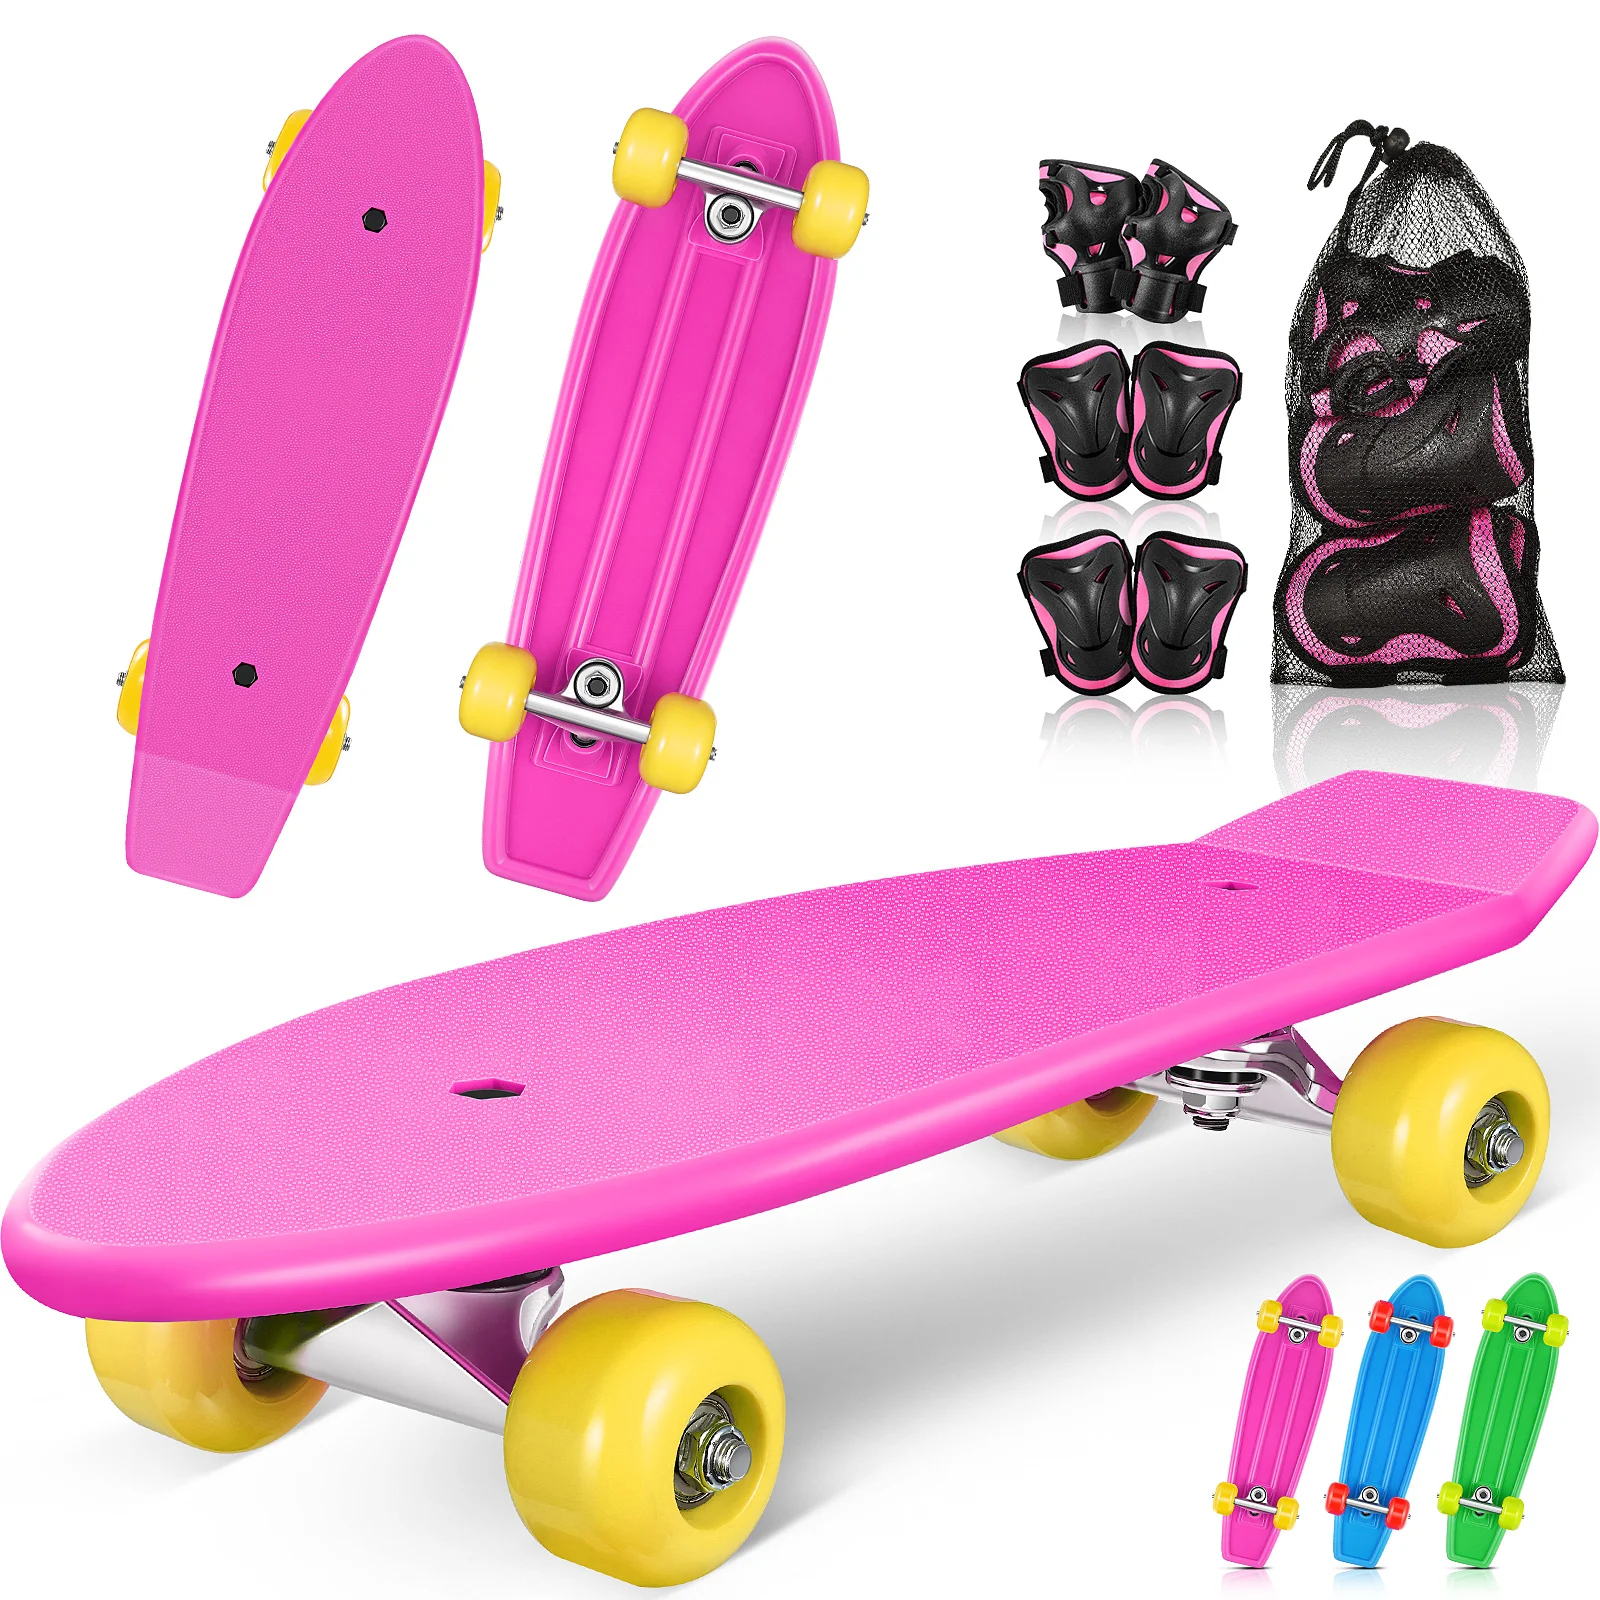 

MOVTOTOP Kids Skateboard Kit Complete Skateboard Downhill Longboard with Protective Gears for Boys Girls Kids Beginners (Pink)